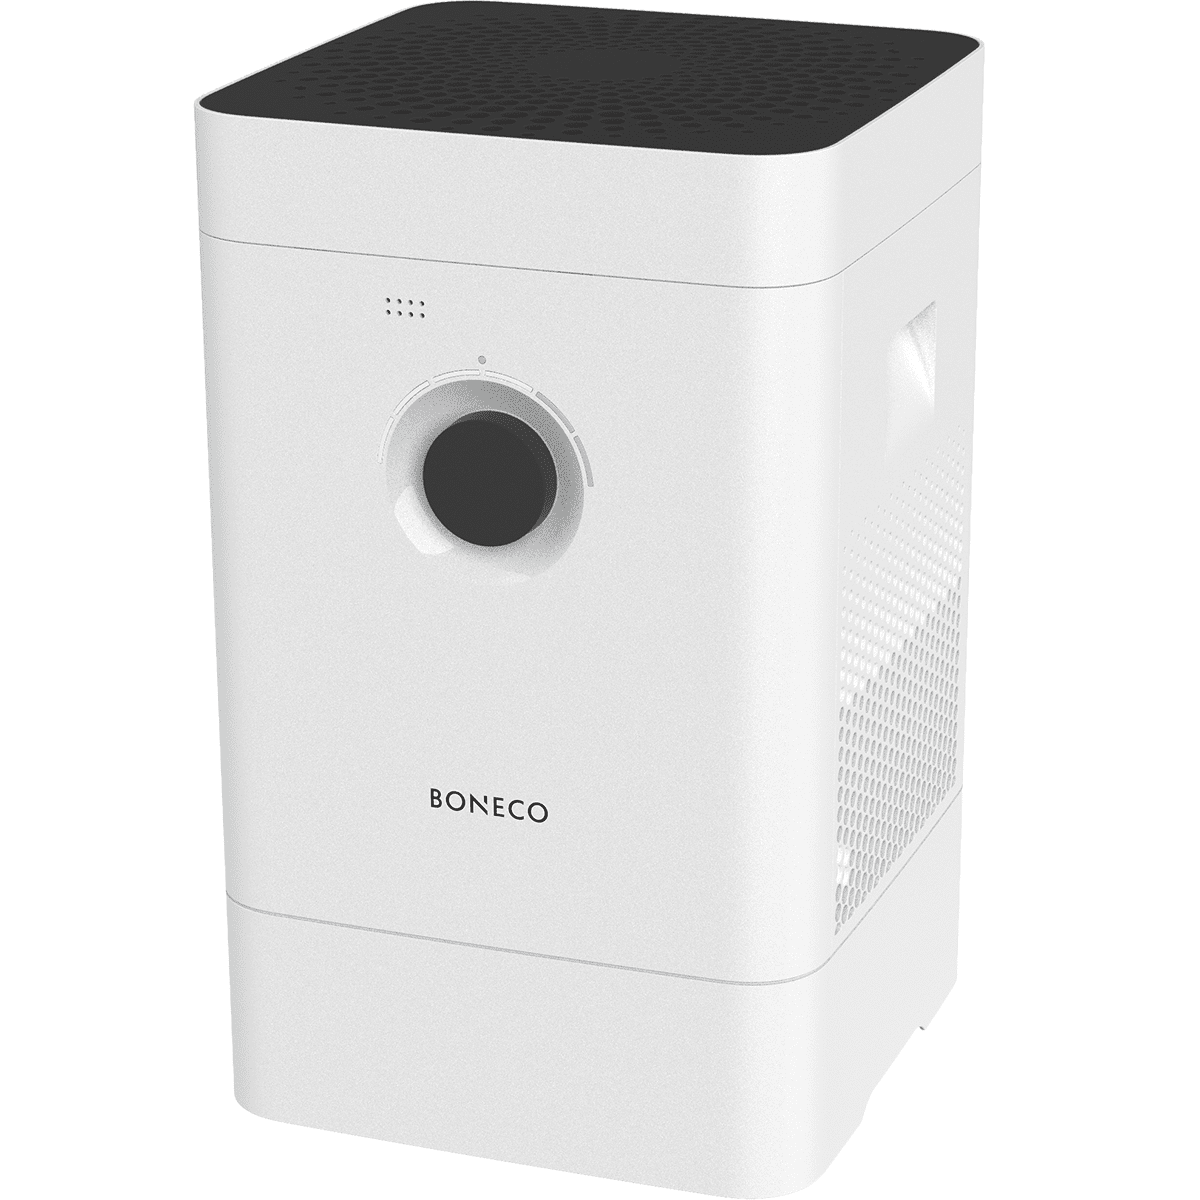 Boneco H300 Hybrid 3-in-1 Humidifier and Air Purifier